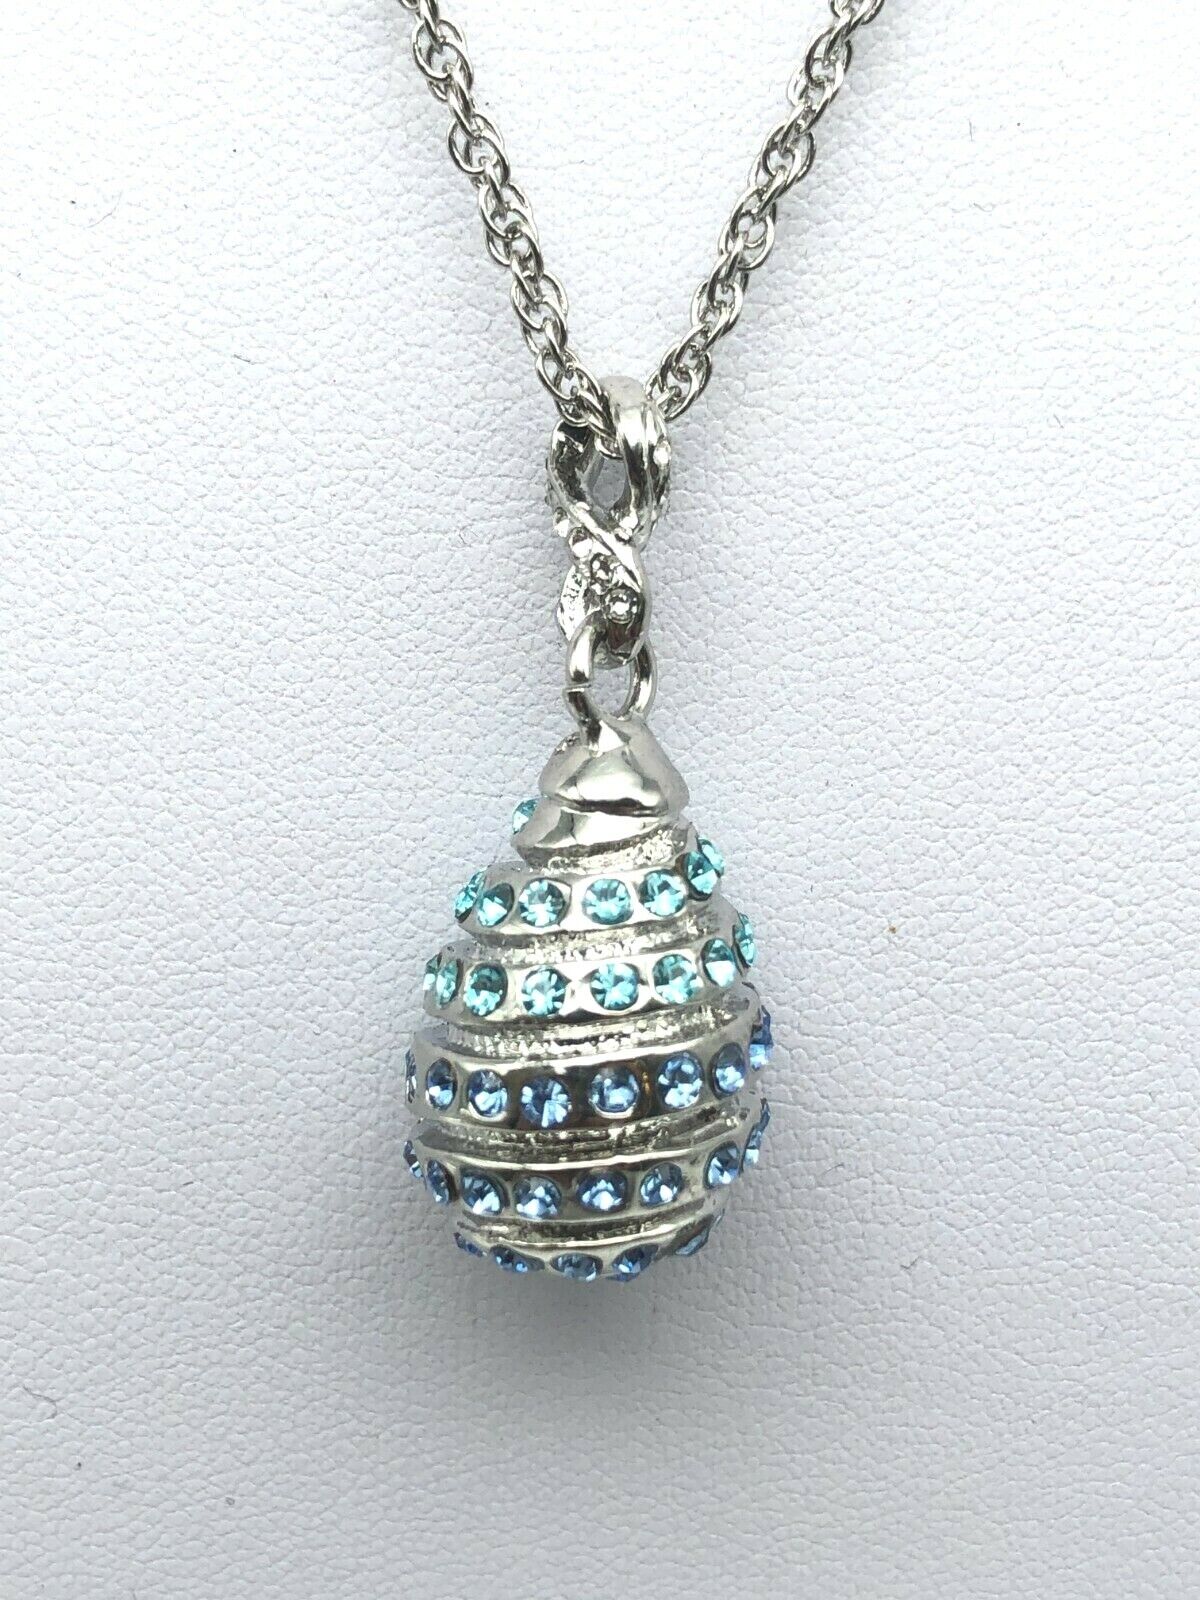 Silver and blue Egg Pendant Necklace with crystals by Keren Kopal